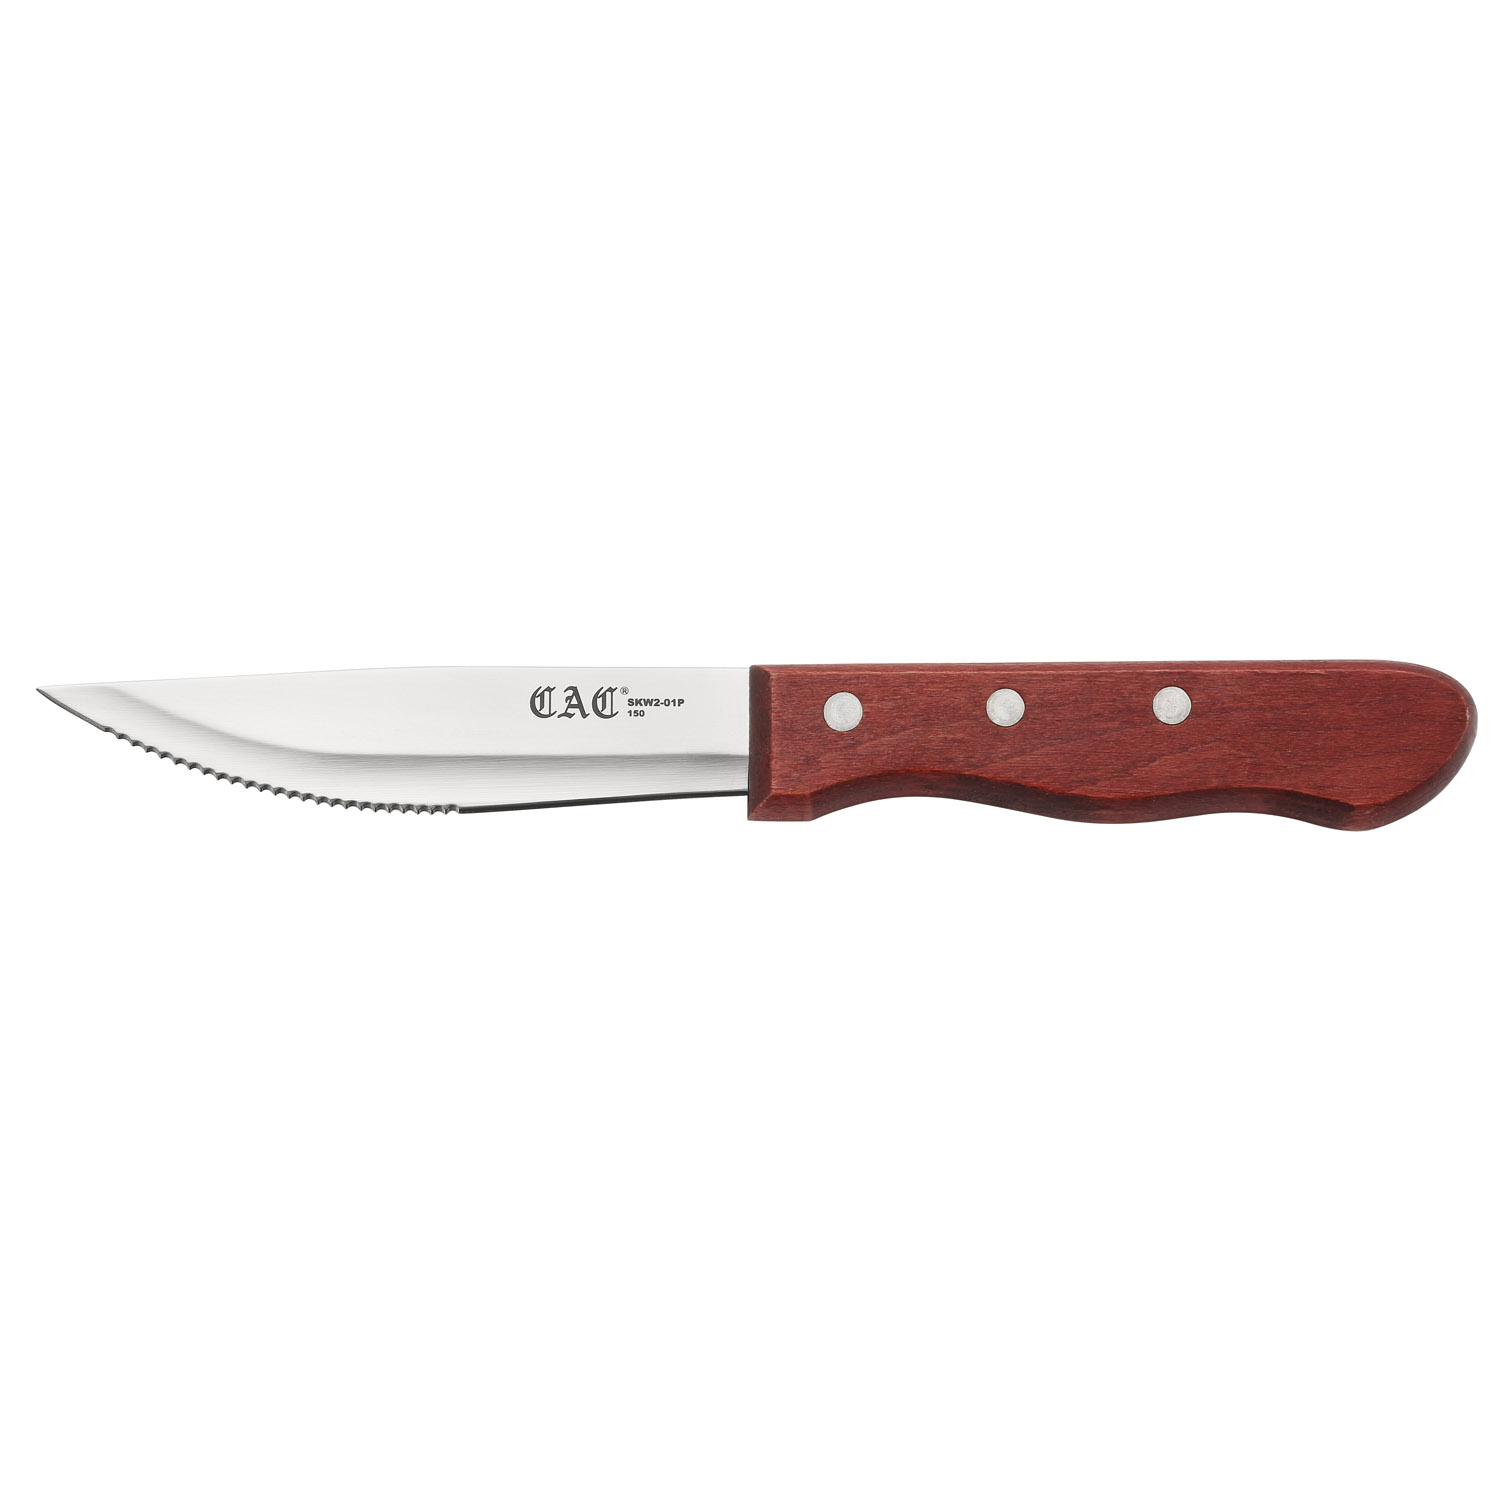 CAC China SKW2-01P Steak Knife with Pointed Tip, Red Wood Handle 4 3/4"